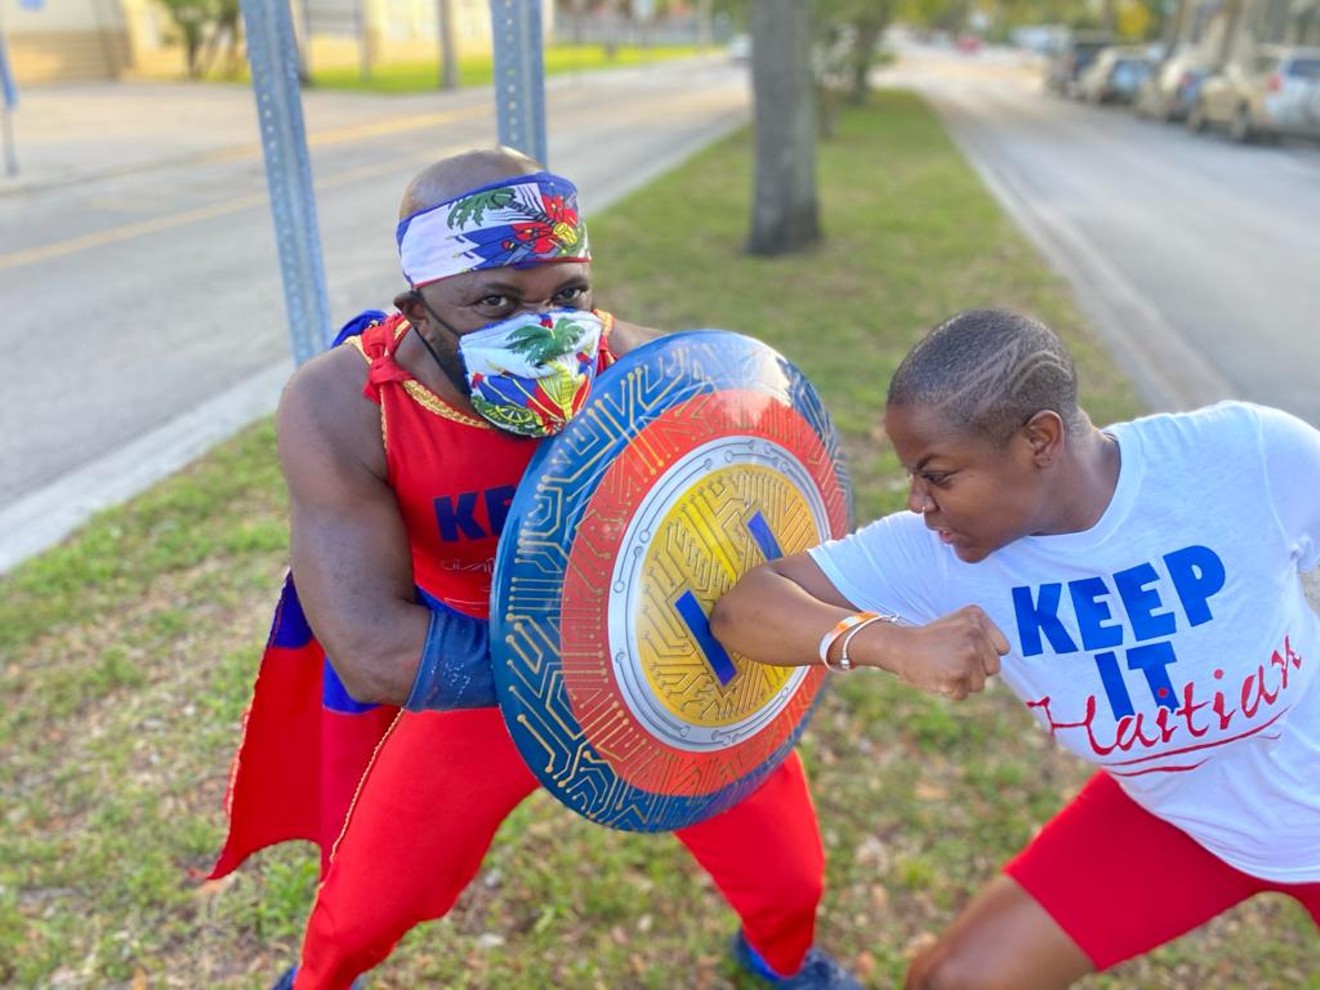 Captain Haiti is a Little Haiti superhero who wants to clean up the neighborhood using cryptocurrency.